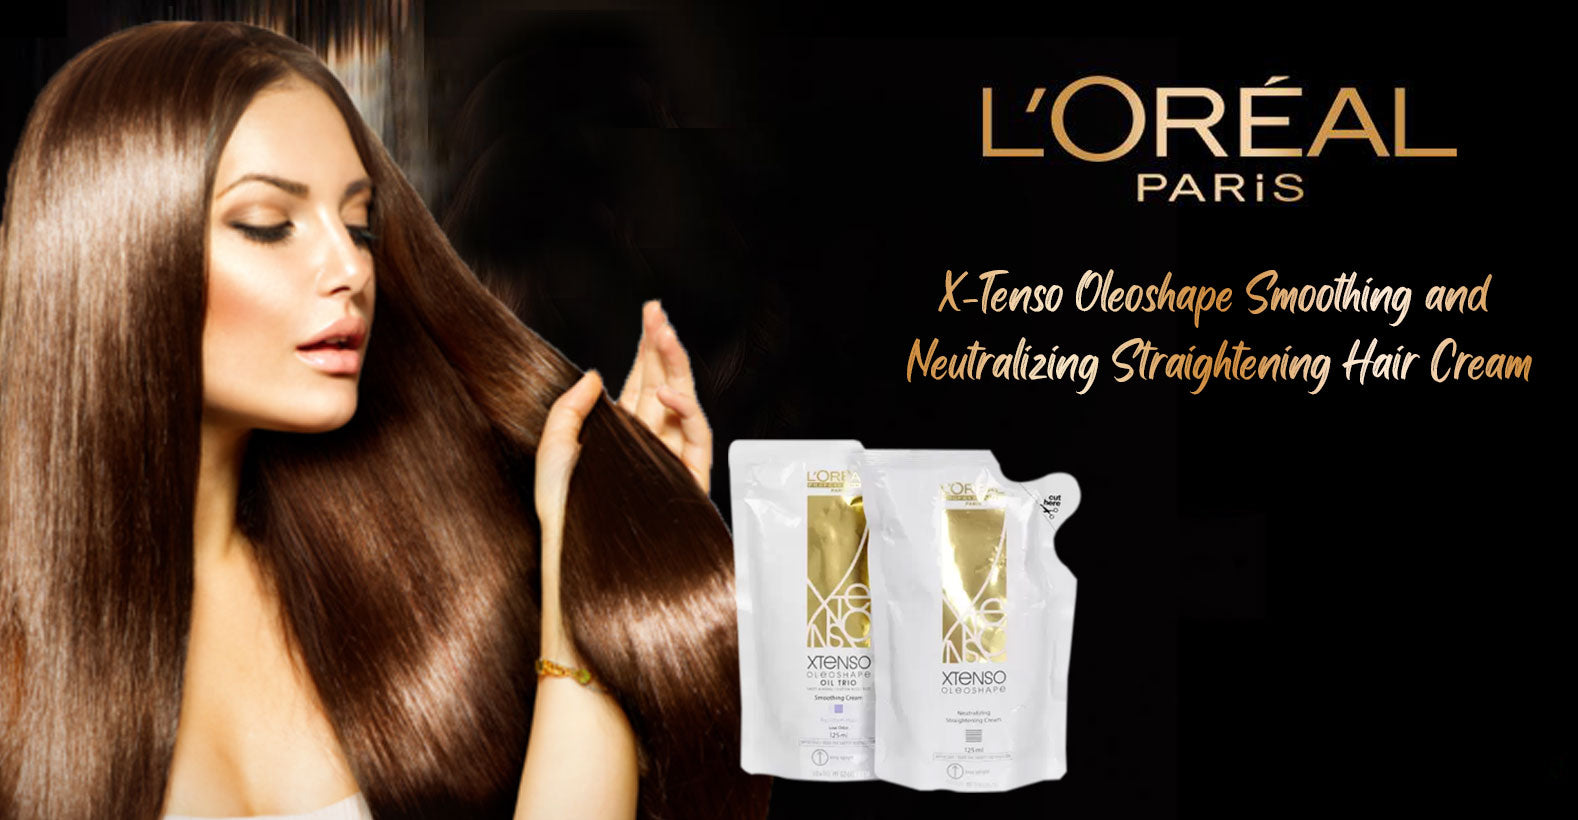 Hair Smoothening Price - 2 In1 Rs 2500 - 75% Discount Deal